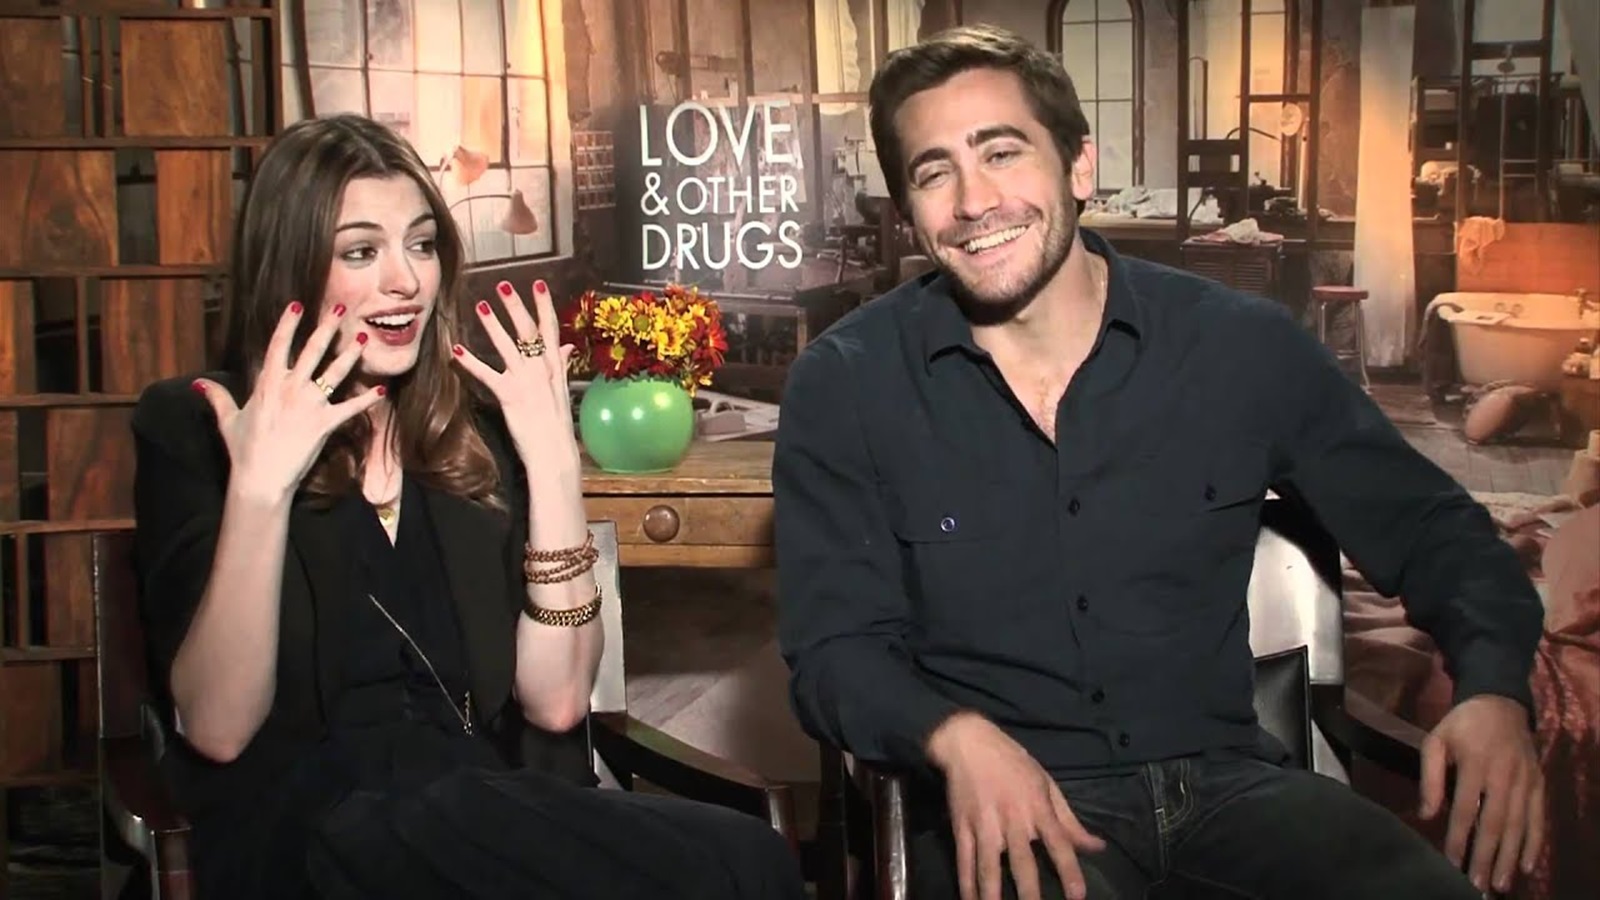 Beef - Lo scontro 2: Jake Gyllenhaal, Anne Hathaway, Charles Melton e Cailee Spaeny protagonisti?